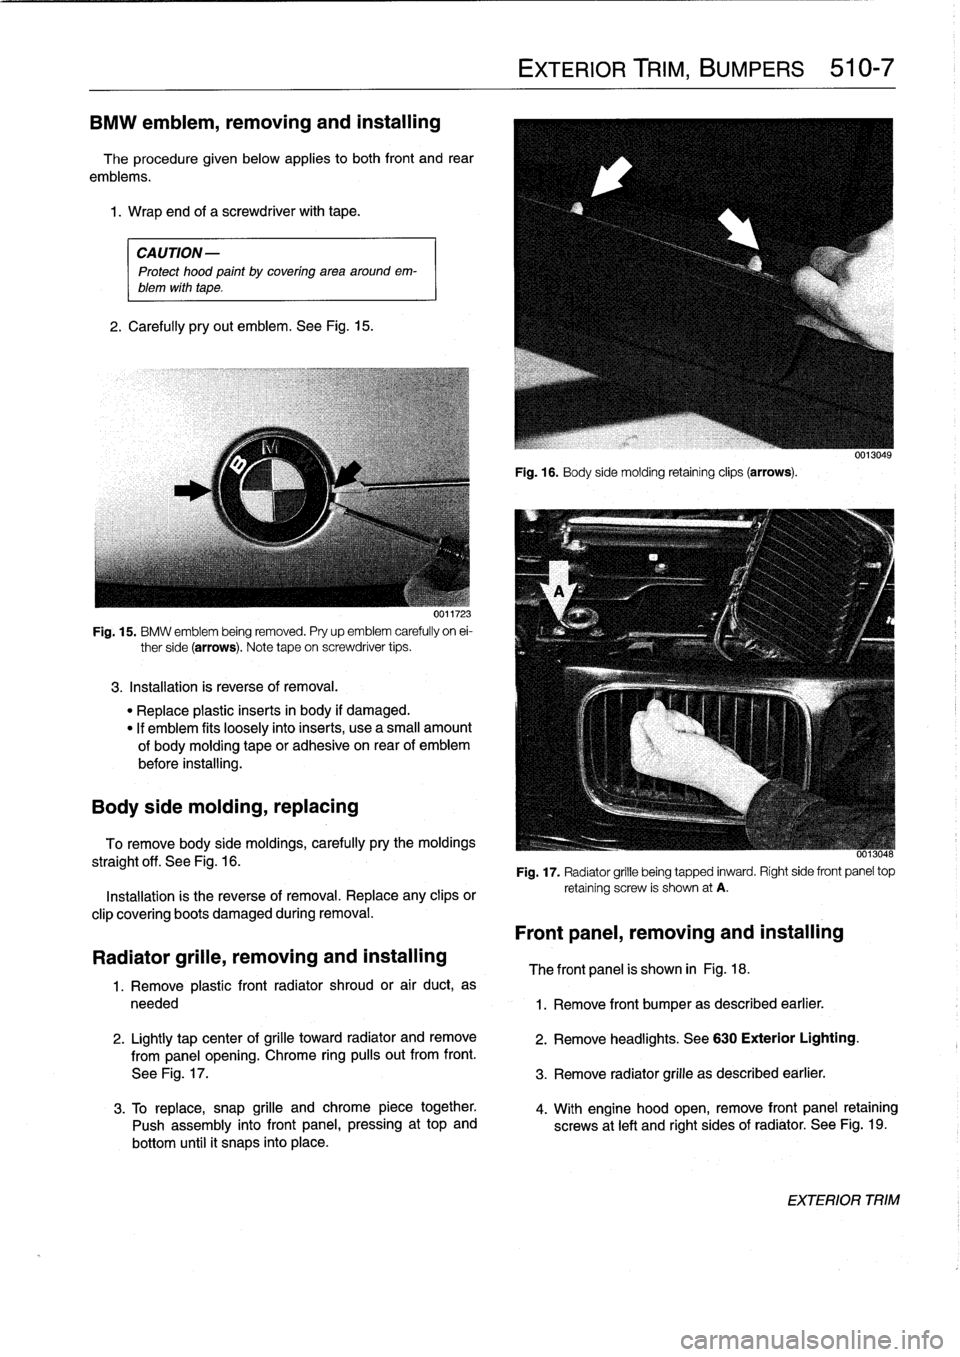 BMW 318i 1992 E36 Workshop Manual 
BMW
emblem,
removing
and
installing

The
procedure
given
below
applies
to
both
front
and
rear

emblems
.

1
.
Wrap
and
of
a
screwdriver
with
tape
.

CAUTION-

Protect
hood
paint
by
coveringarea
aroun